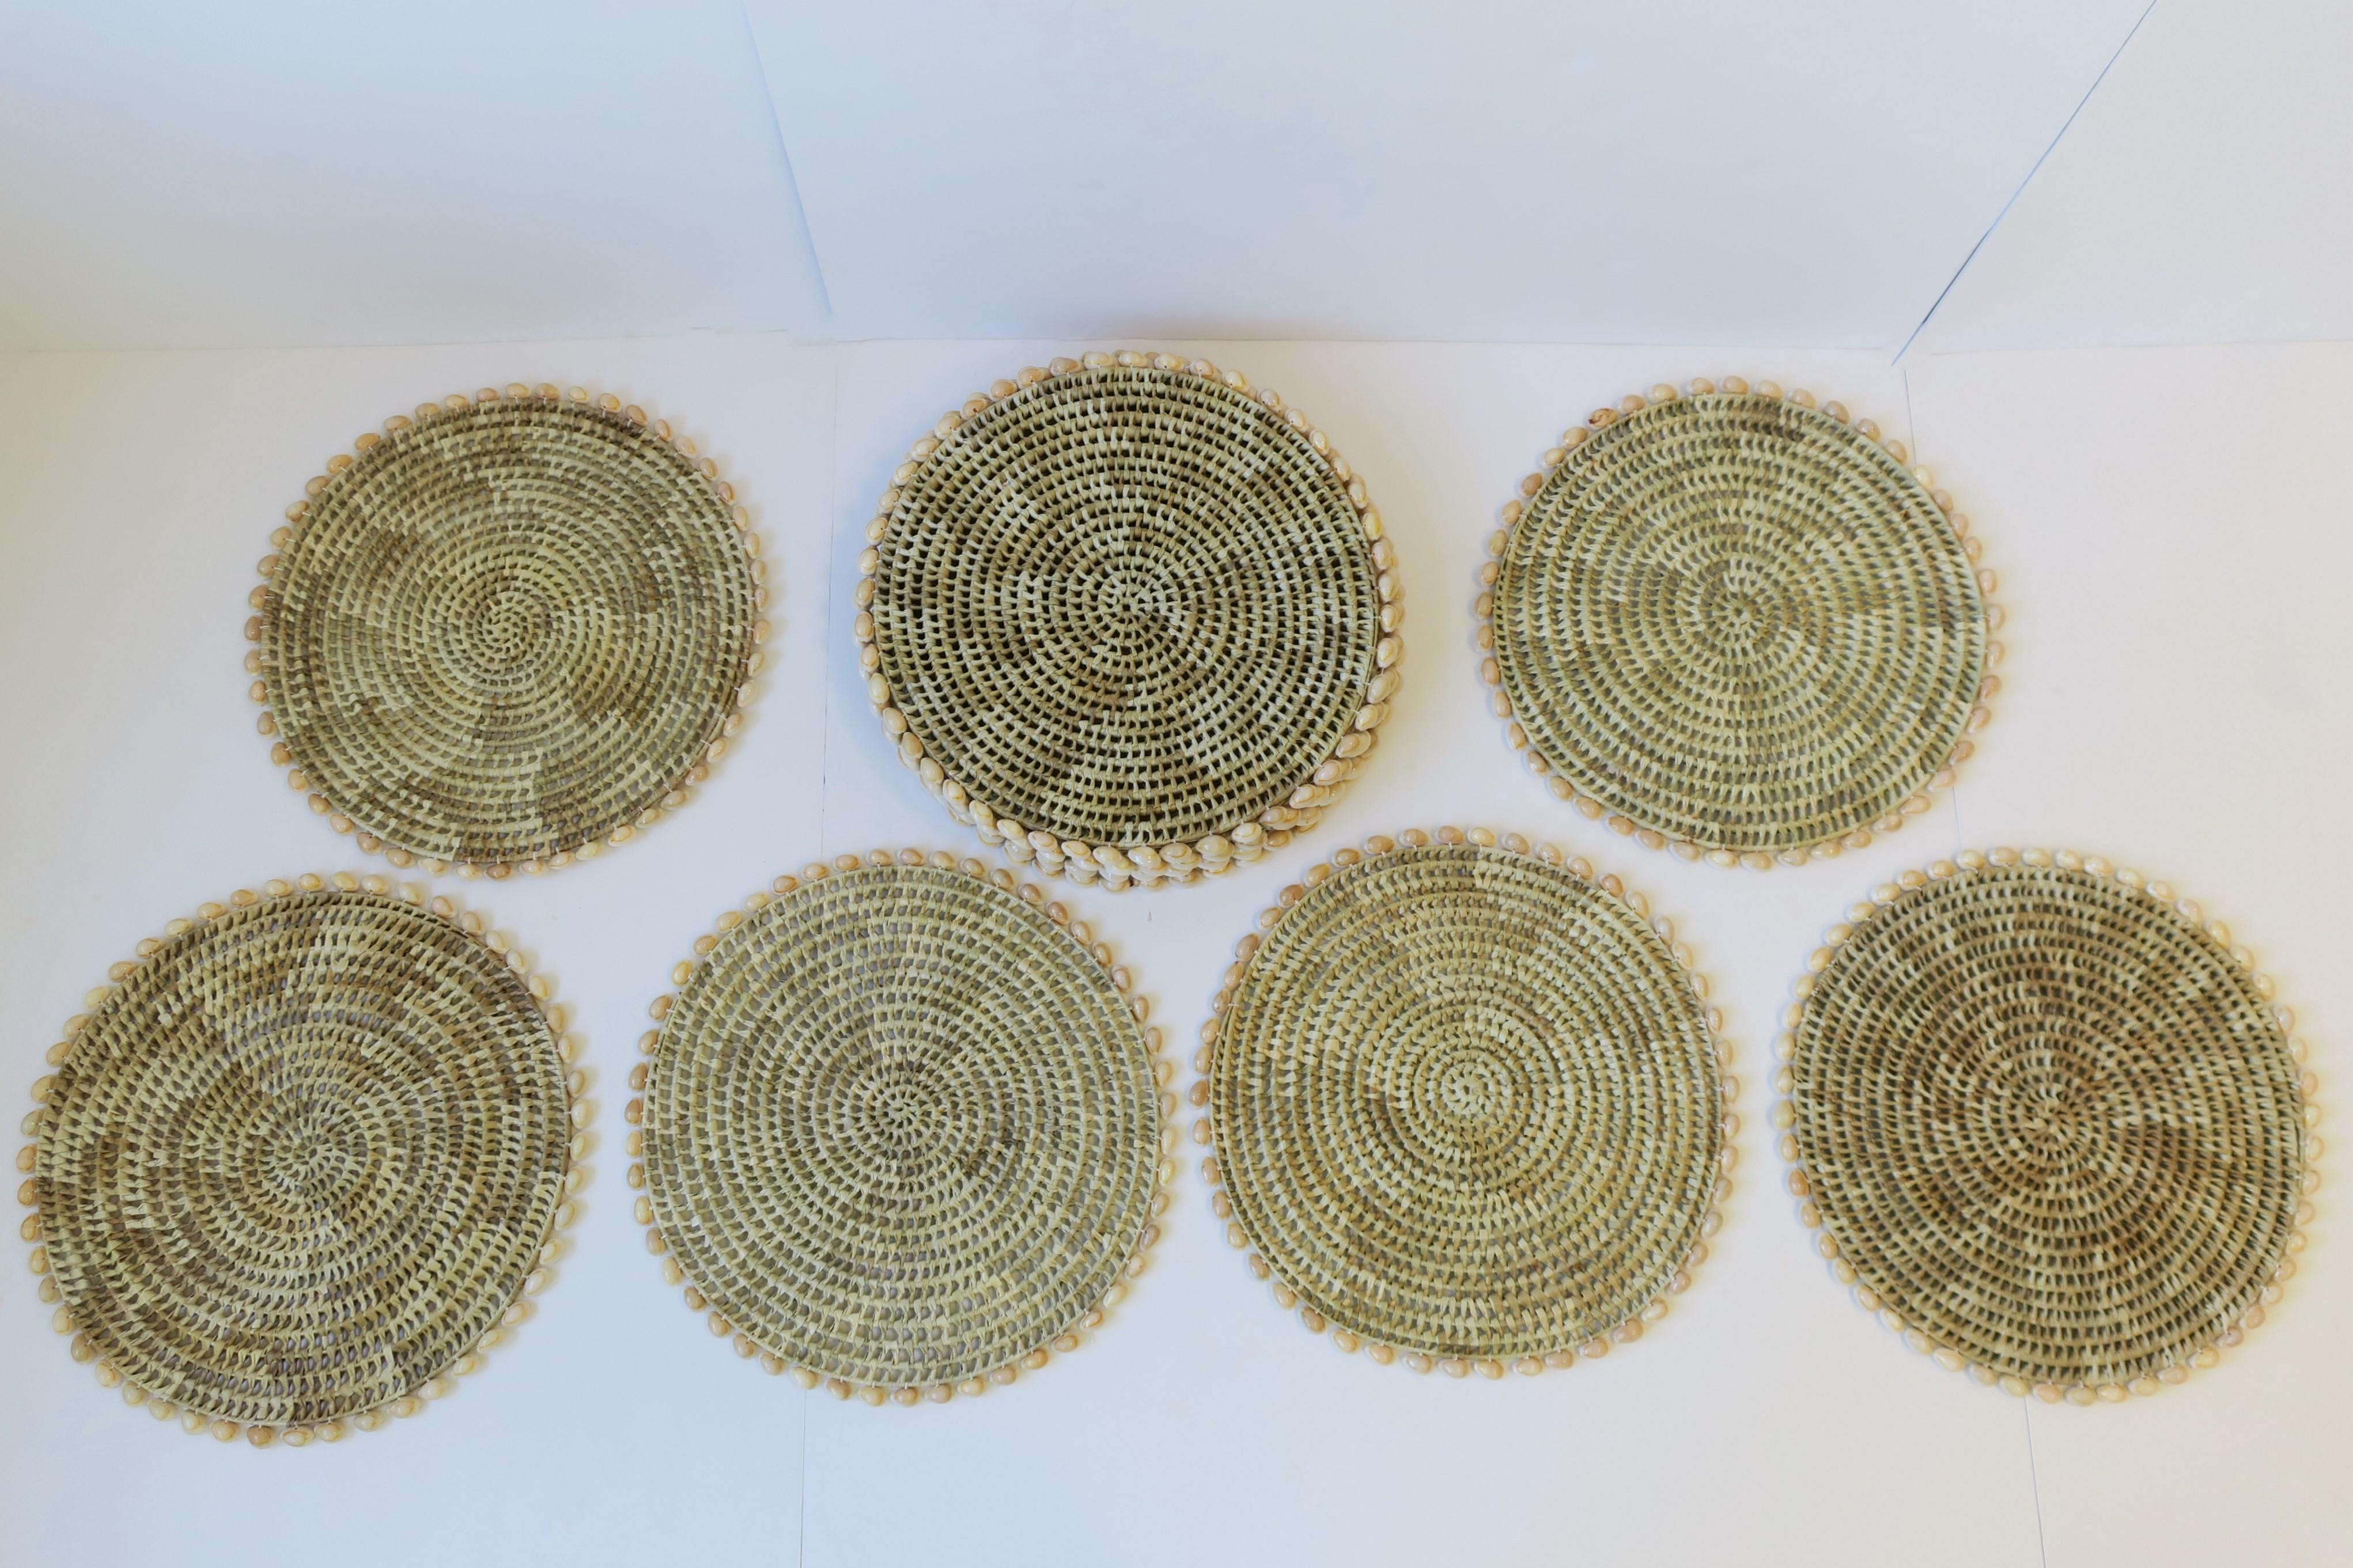 Seashell and Wicker Placemats or Dinner Plate Chargers, Set of 12 4